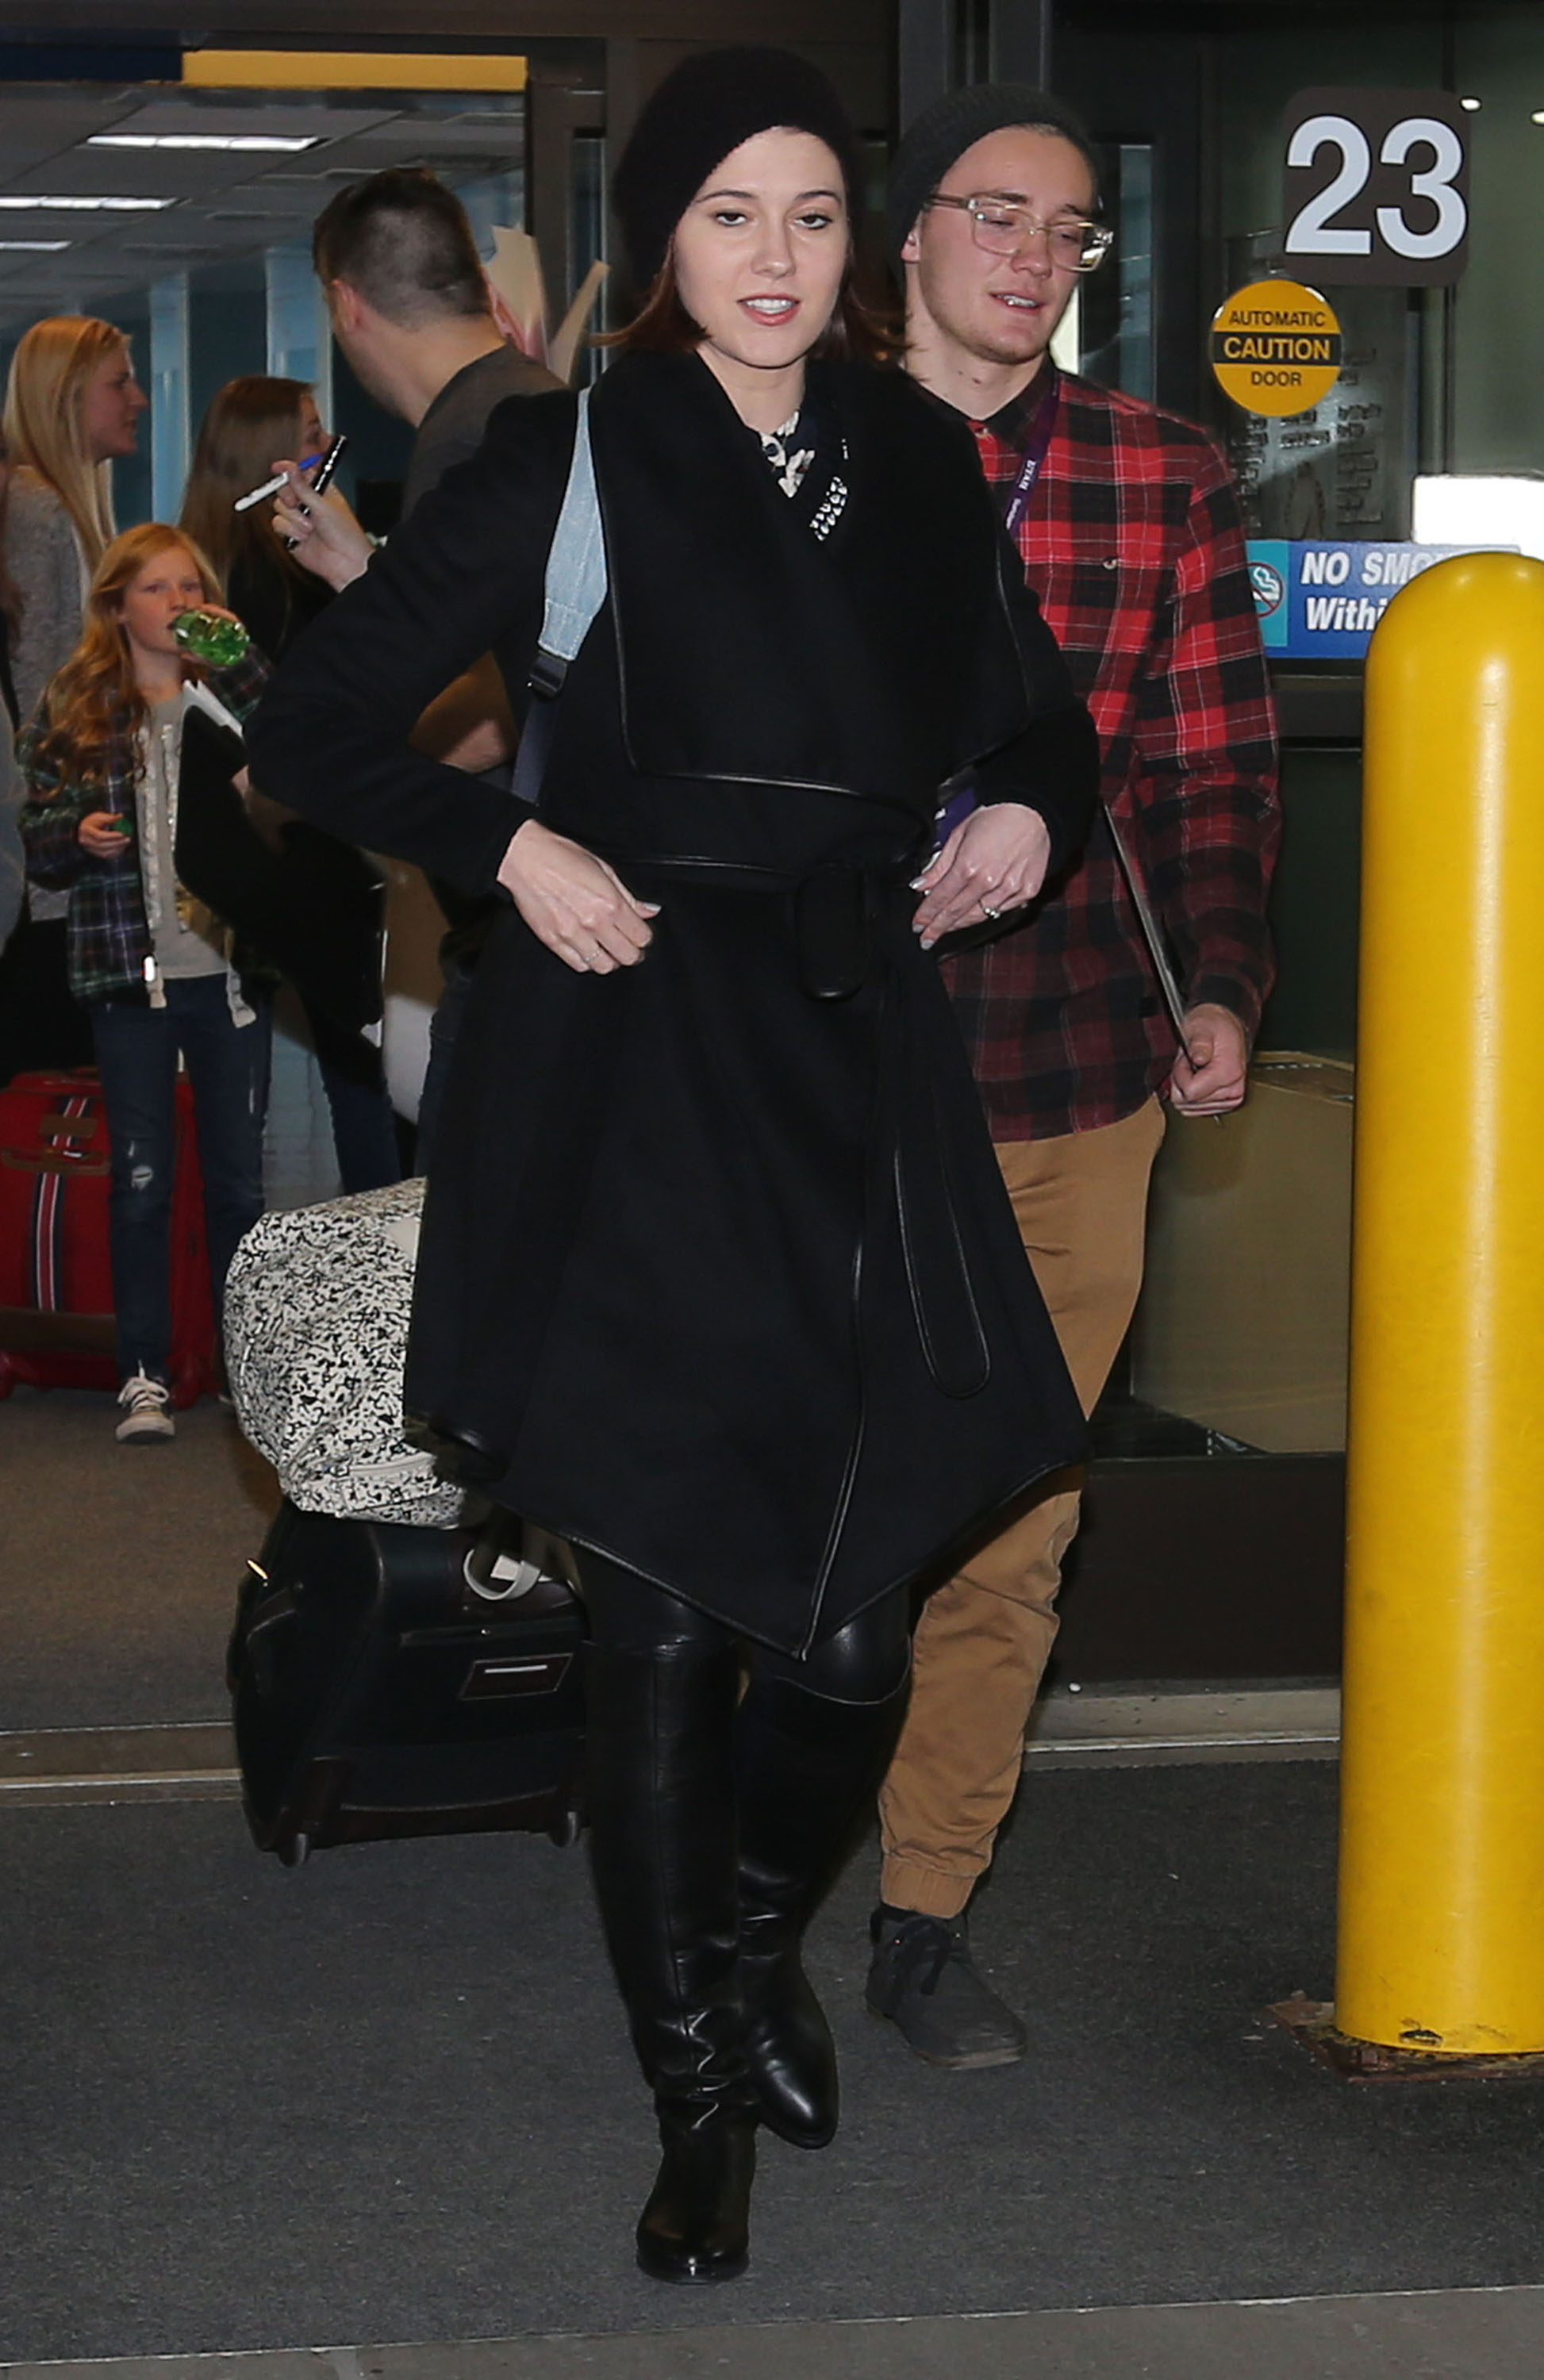 Mary Elizabeth Winstead arriving at the ariport